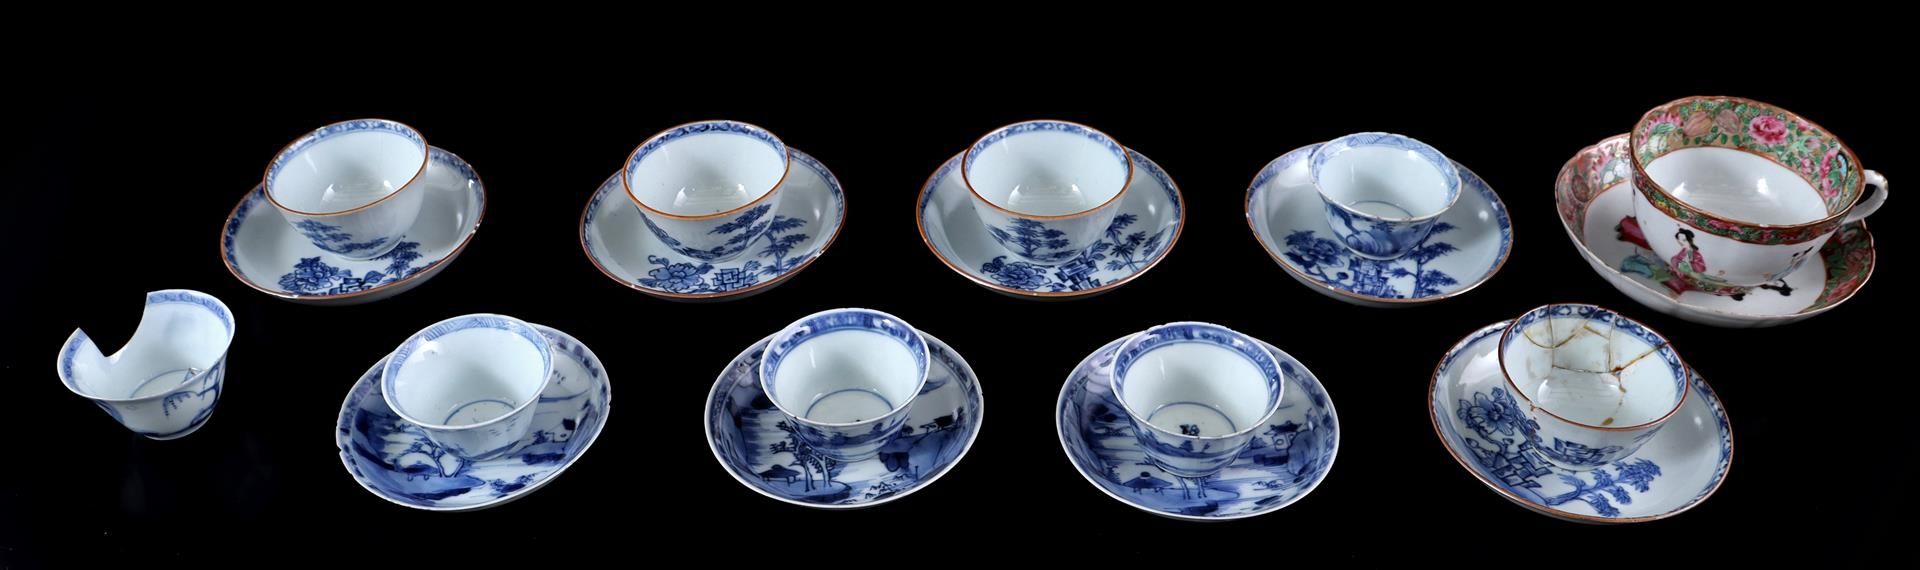 Lot of porcelain bowls and saucers with blue decor - Image 2 of 4